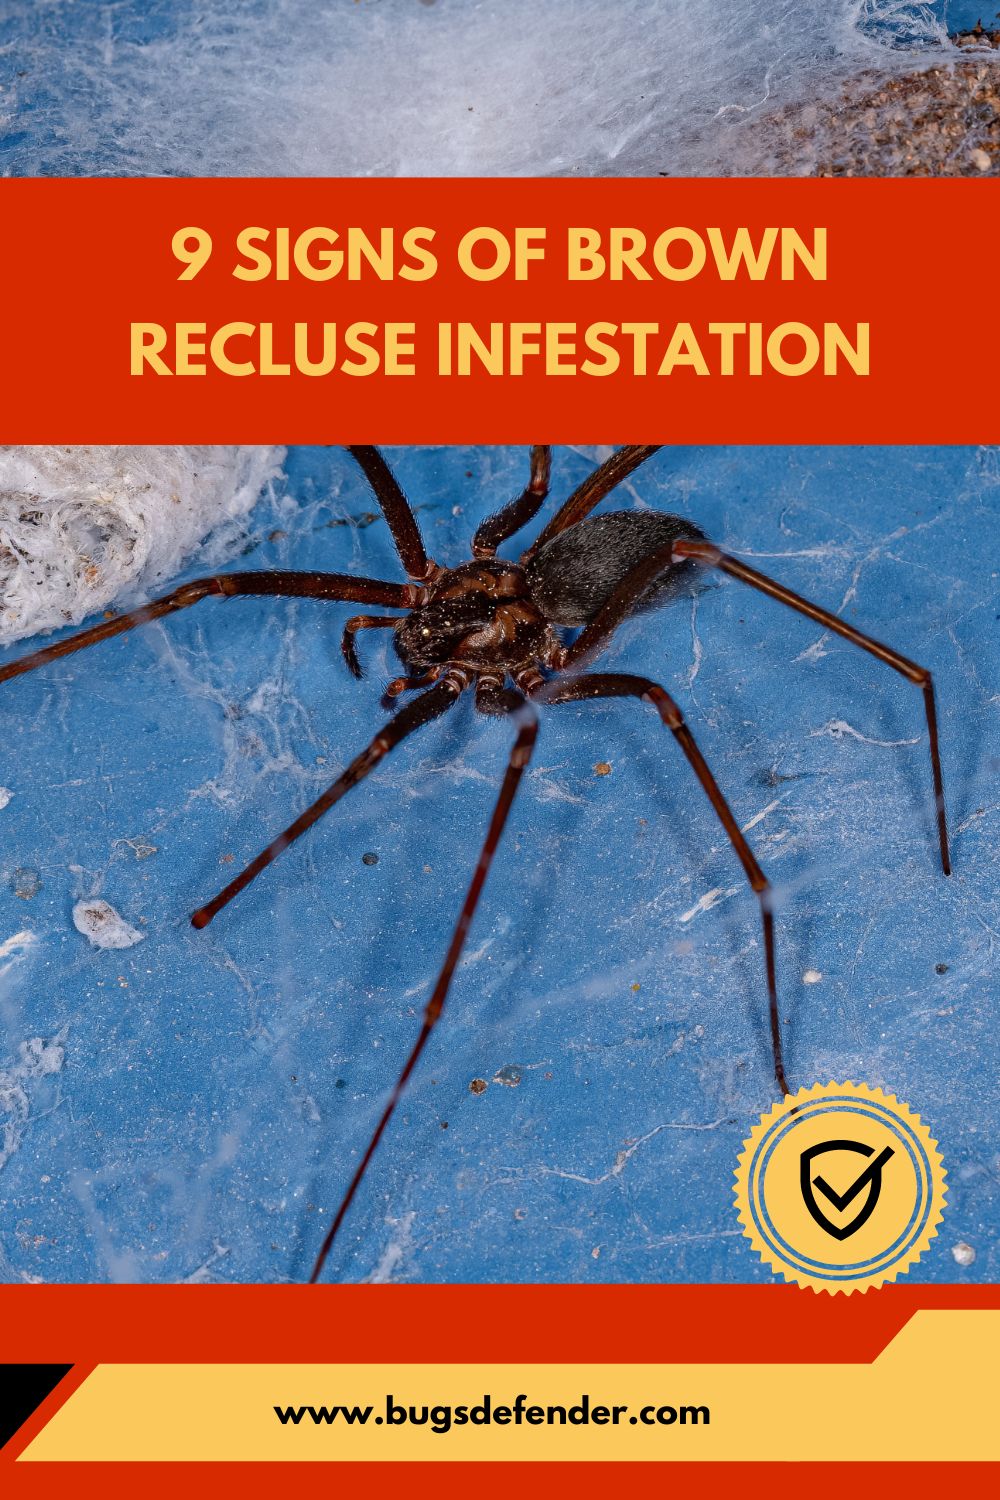 9 Signs of Brown Recluse Infestation pin 1